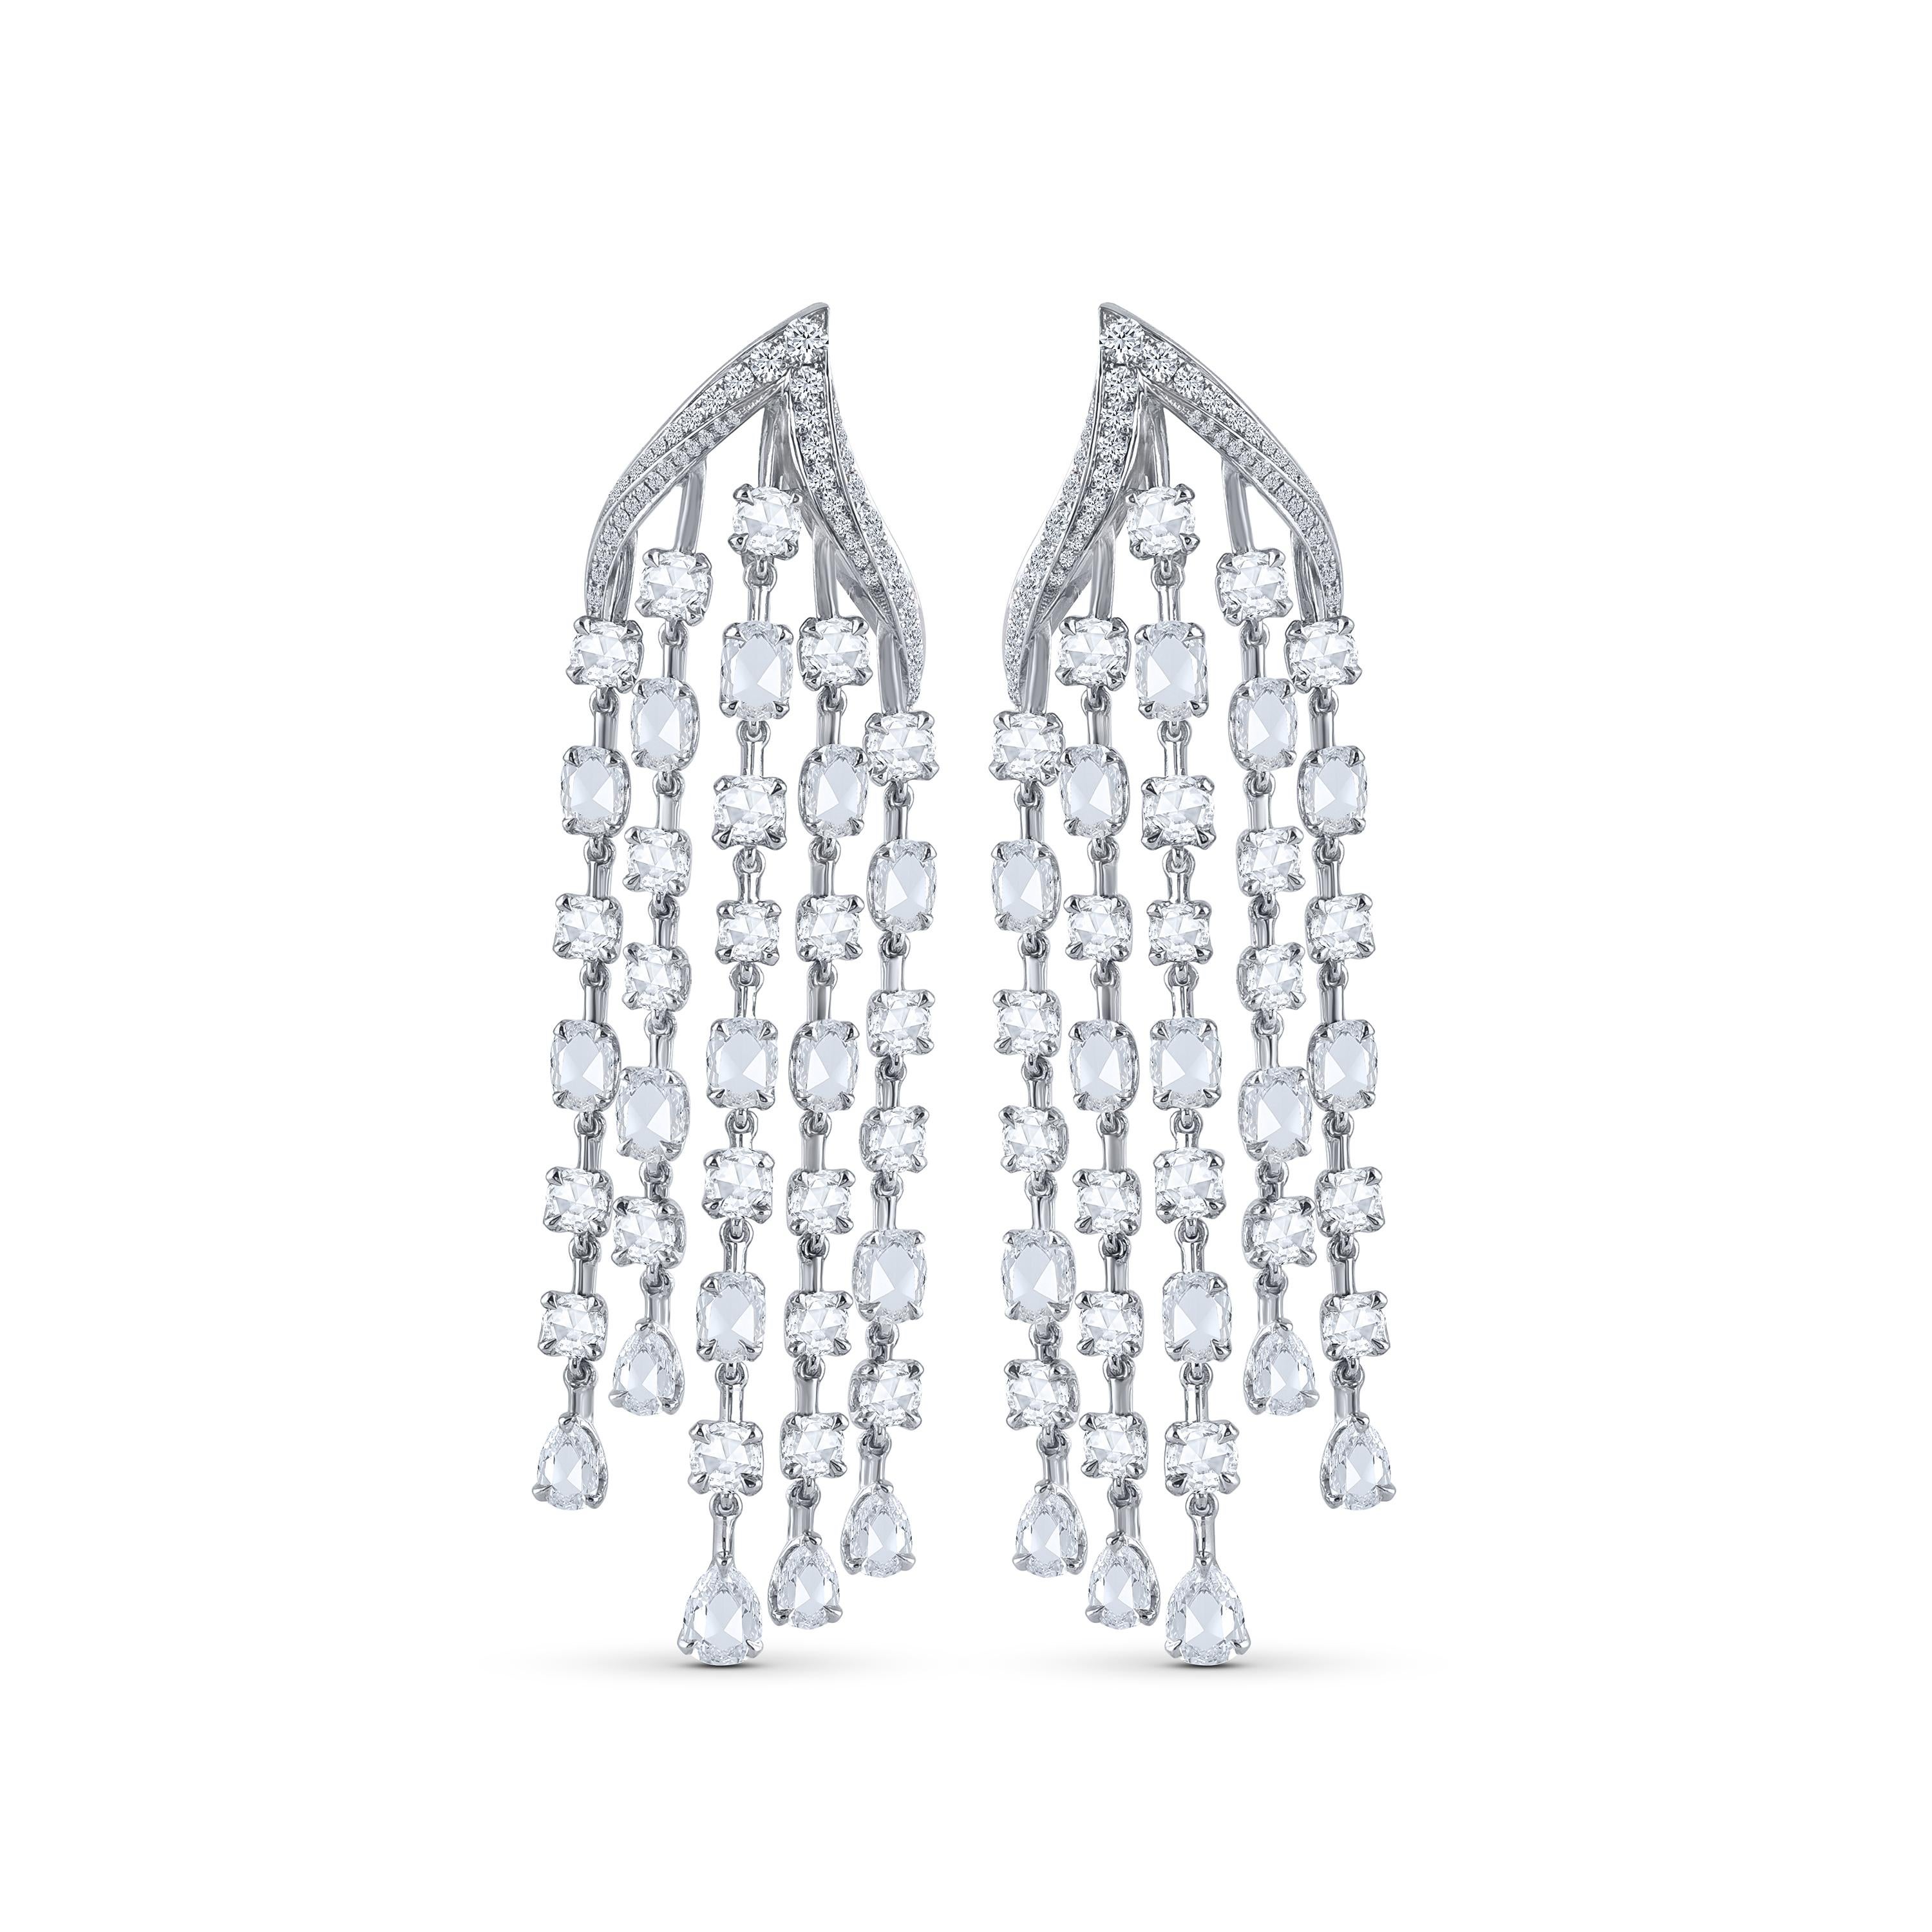 These chandelier earrings from our Cascade Collection are studded with 92 brilliant cut round and 76 rose cut diamonds, totaling up to 7.30 carat of diamond weight.

Inspired by the beauty of the naturally flowing waterfall, these dangling earrings